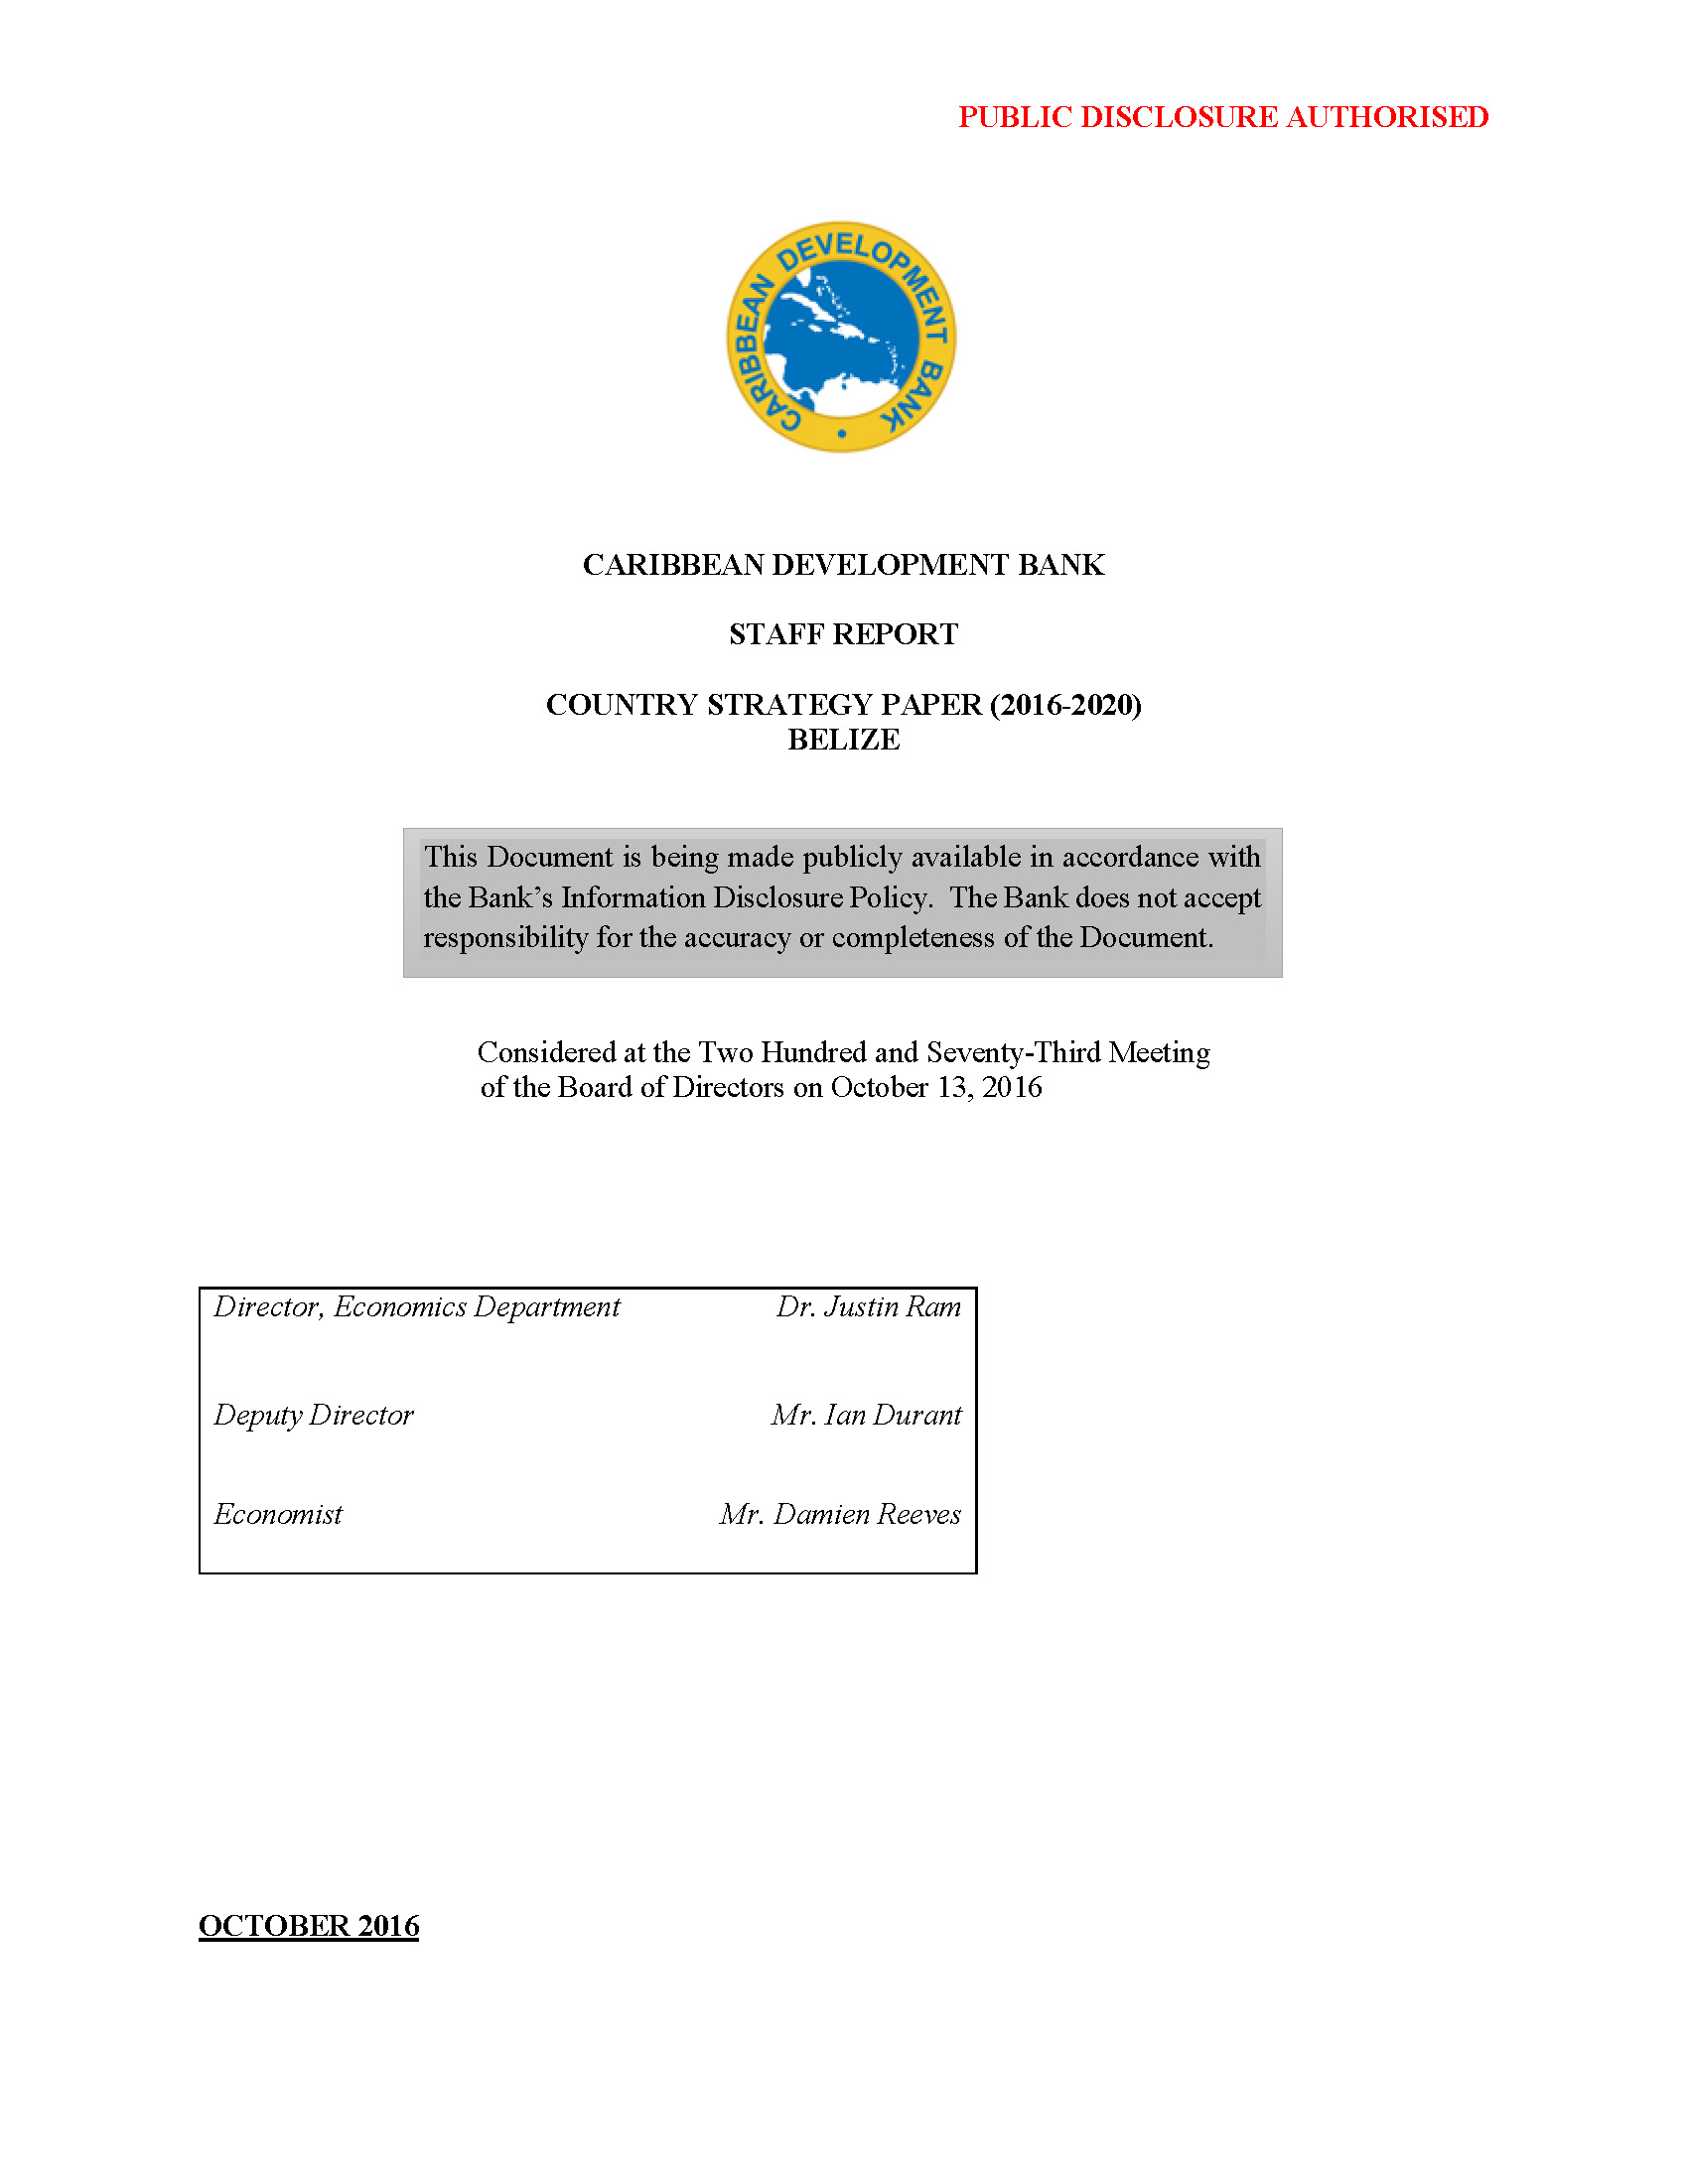 Text-based document cover for Belize's Country Strategy Paper 2016-2020